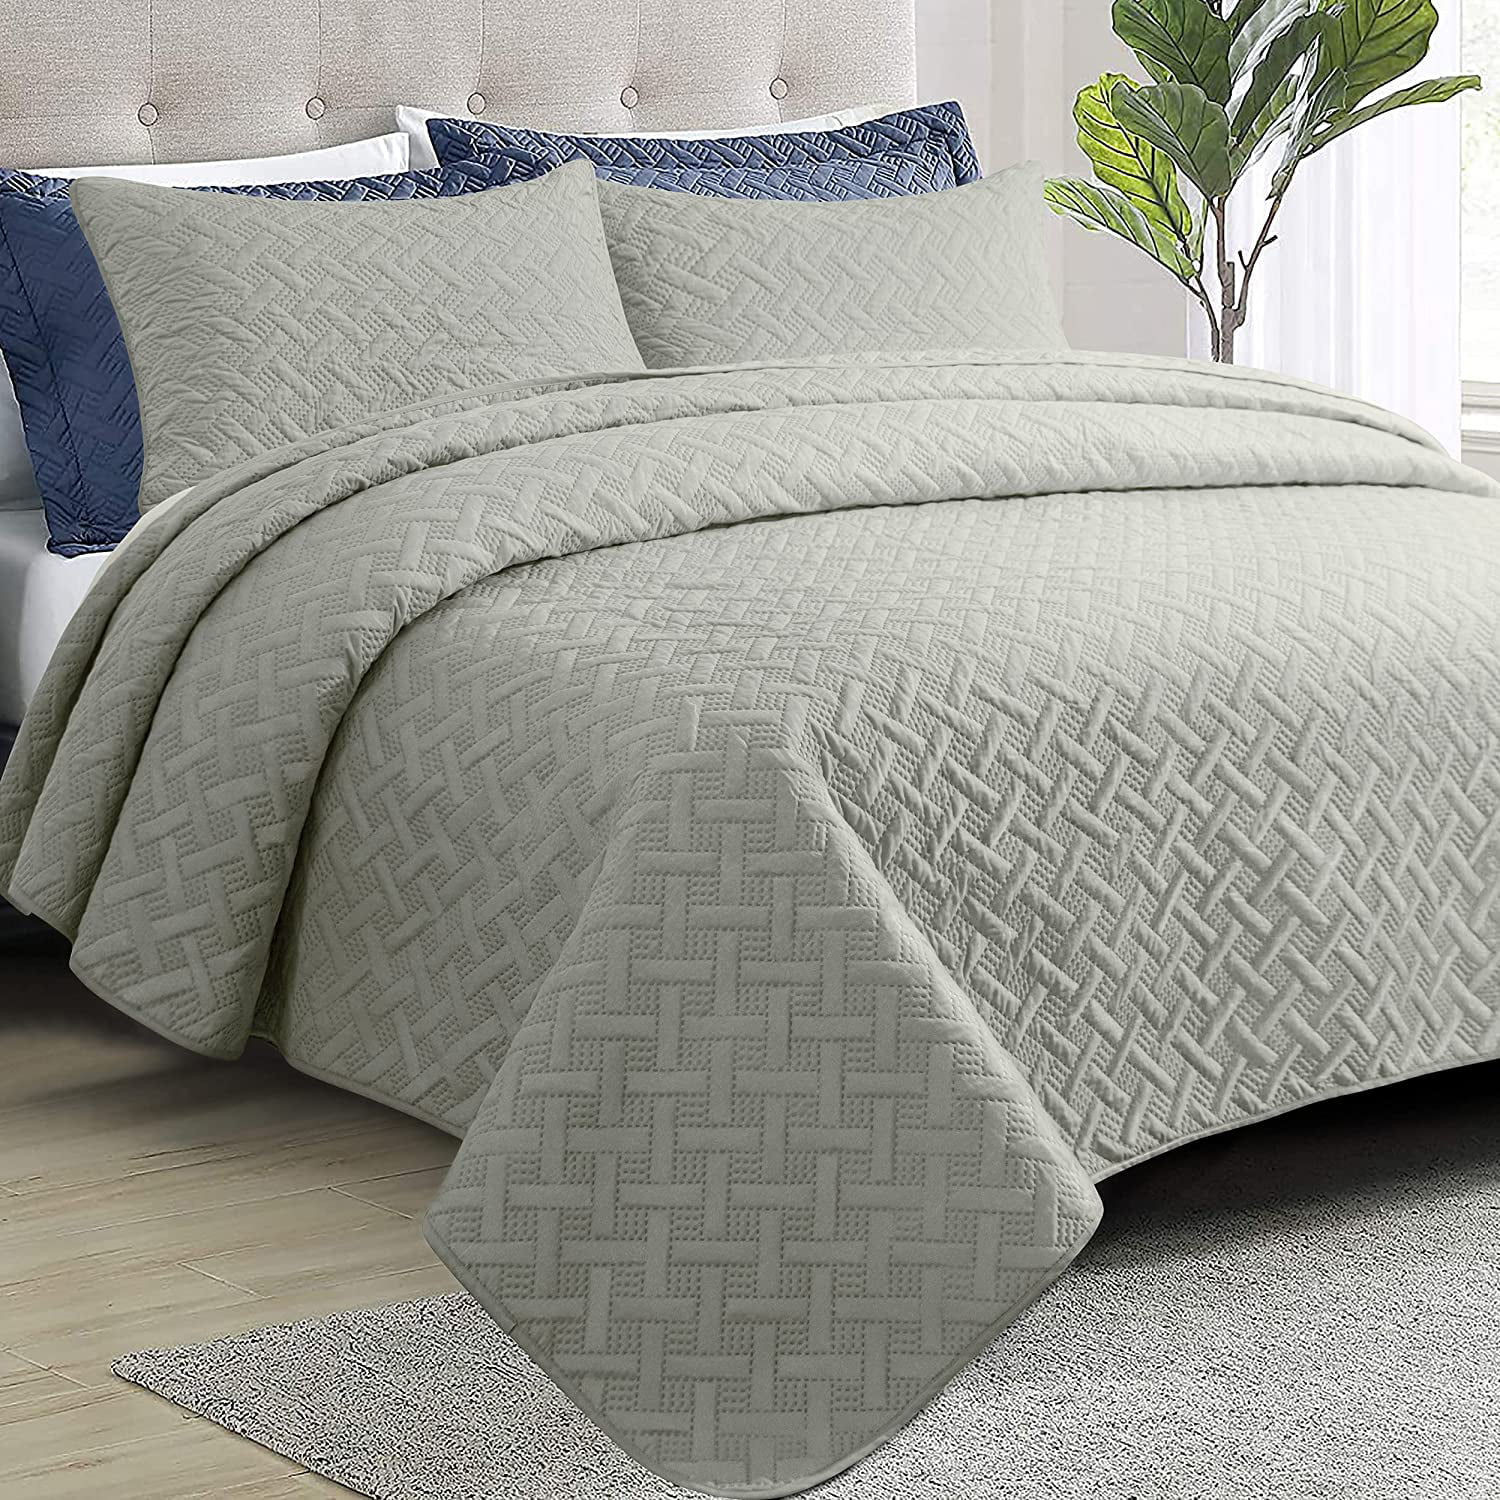 Quilted Bedspread Comforter Microfiber Embossed Bed Pattern With pillow Shams 